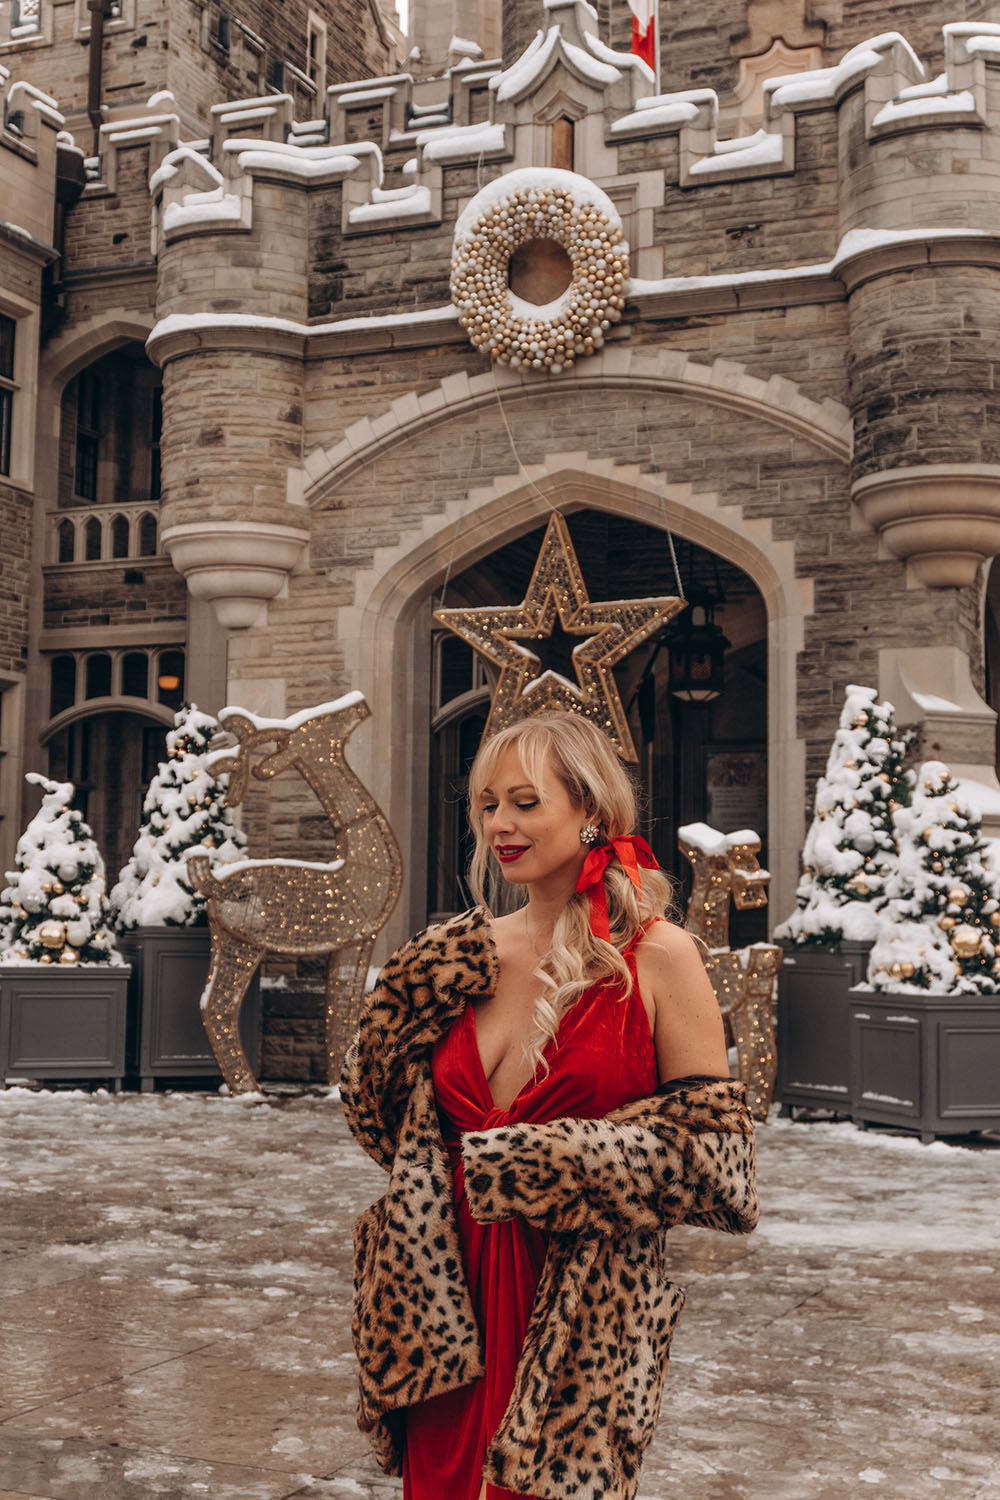 Looking for some fun things to do at Christmas in Toronto this holiday season? This guide is for you! Toronto has so many incredibly fun & festive activities to do during the Christmas season. From festive pop up bars to family friendly fun, this guide has you covered to get the most out of the Christmas season in Toronto! Pictured here: Christmas at the Castle